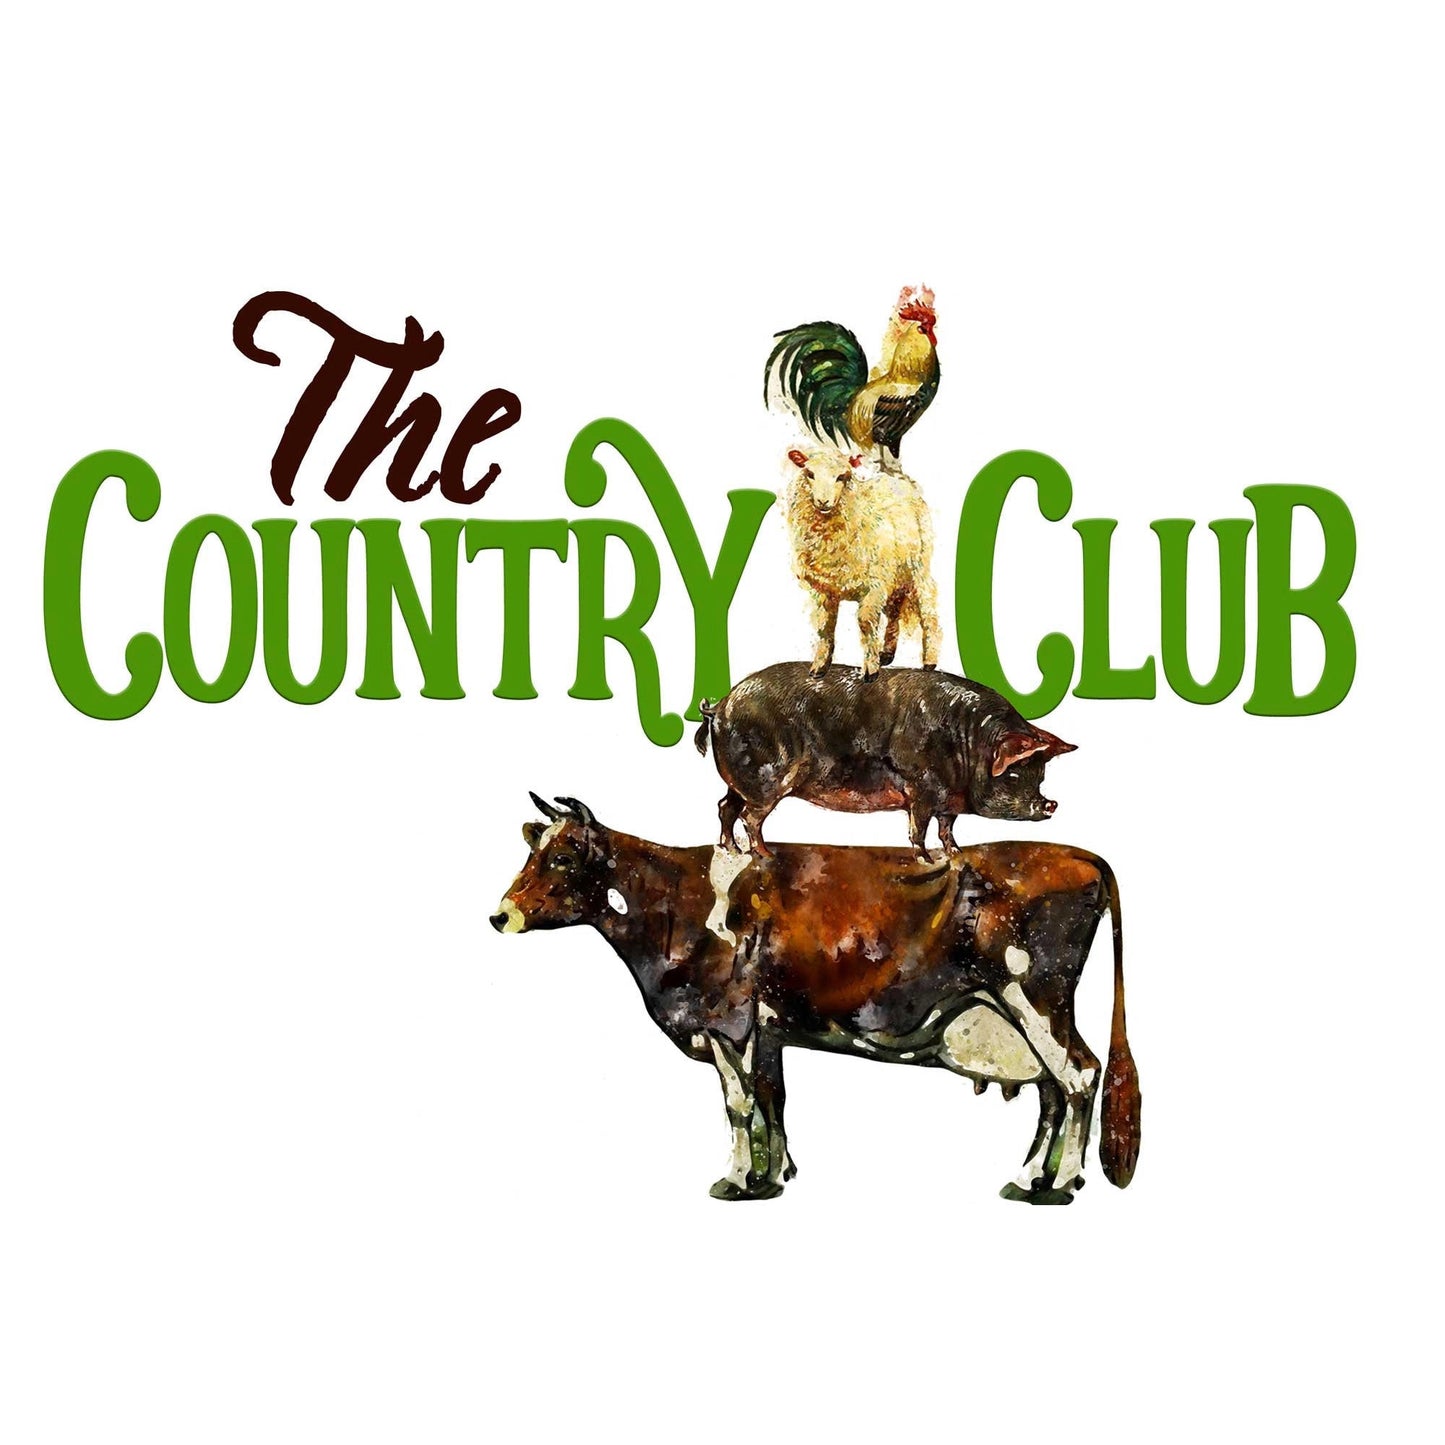 The "Country" Club Bodysuit